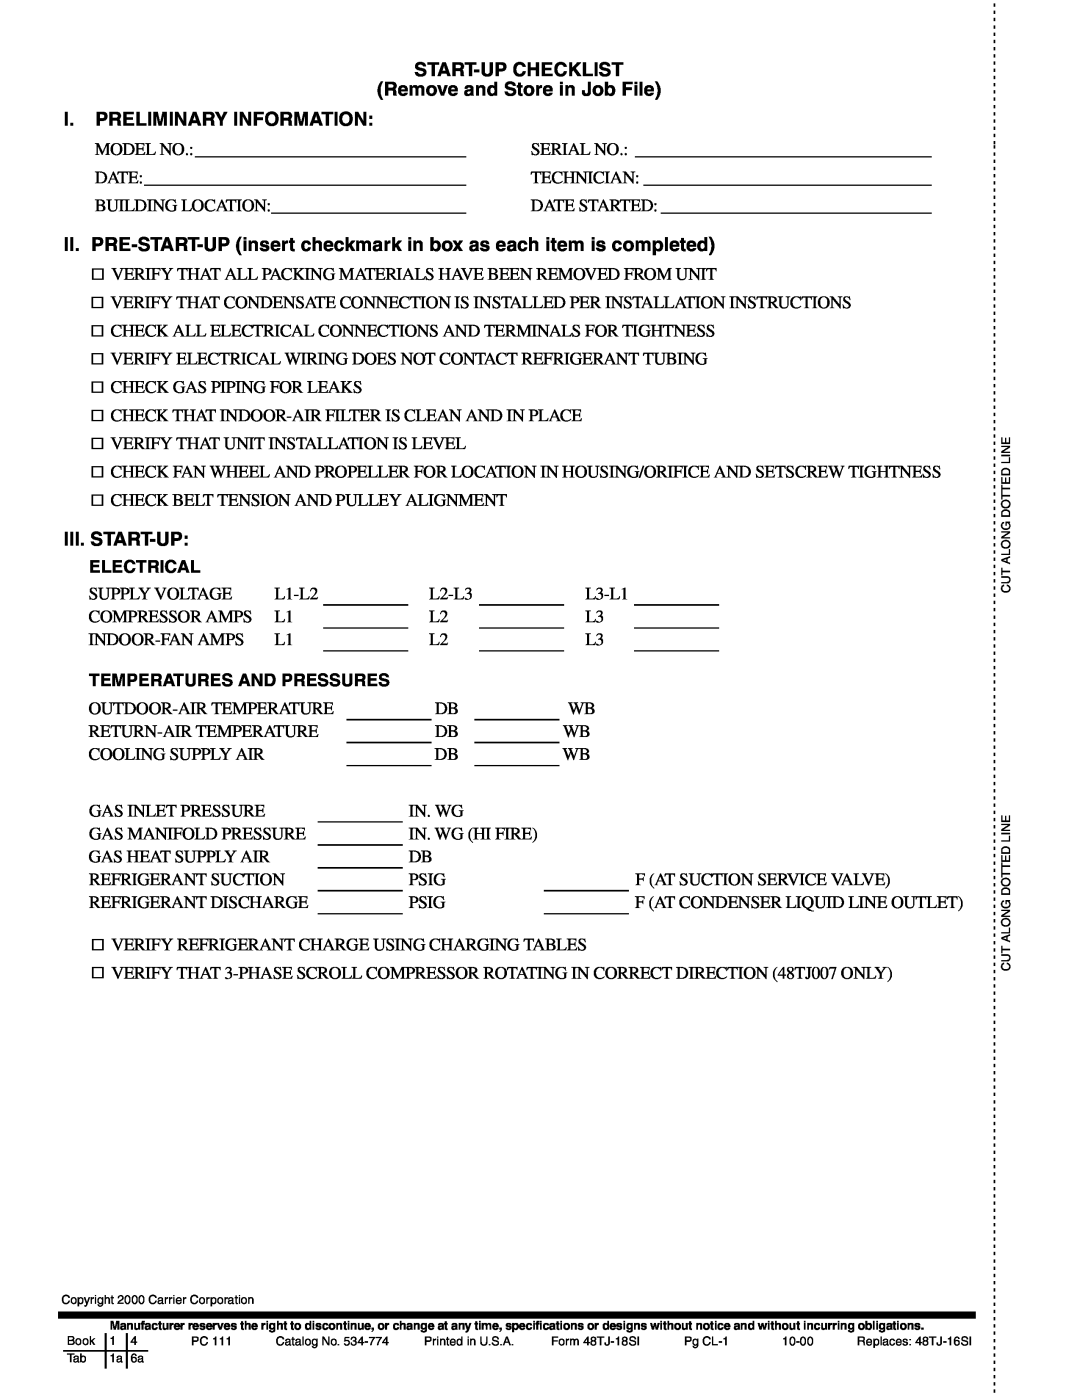 Carrier TJE, TJF004 START-UPCHECKLIST Remove and Store in Job File, I. Preliminary Information, Iii. Start-Up, Electrical 